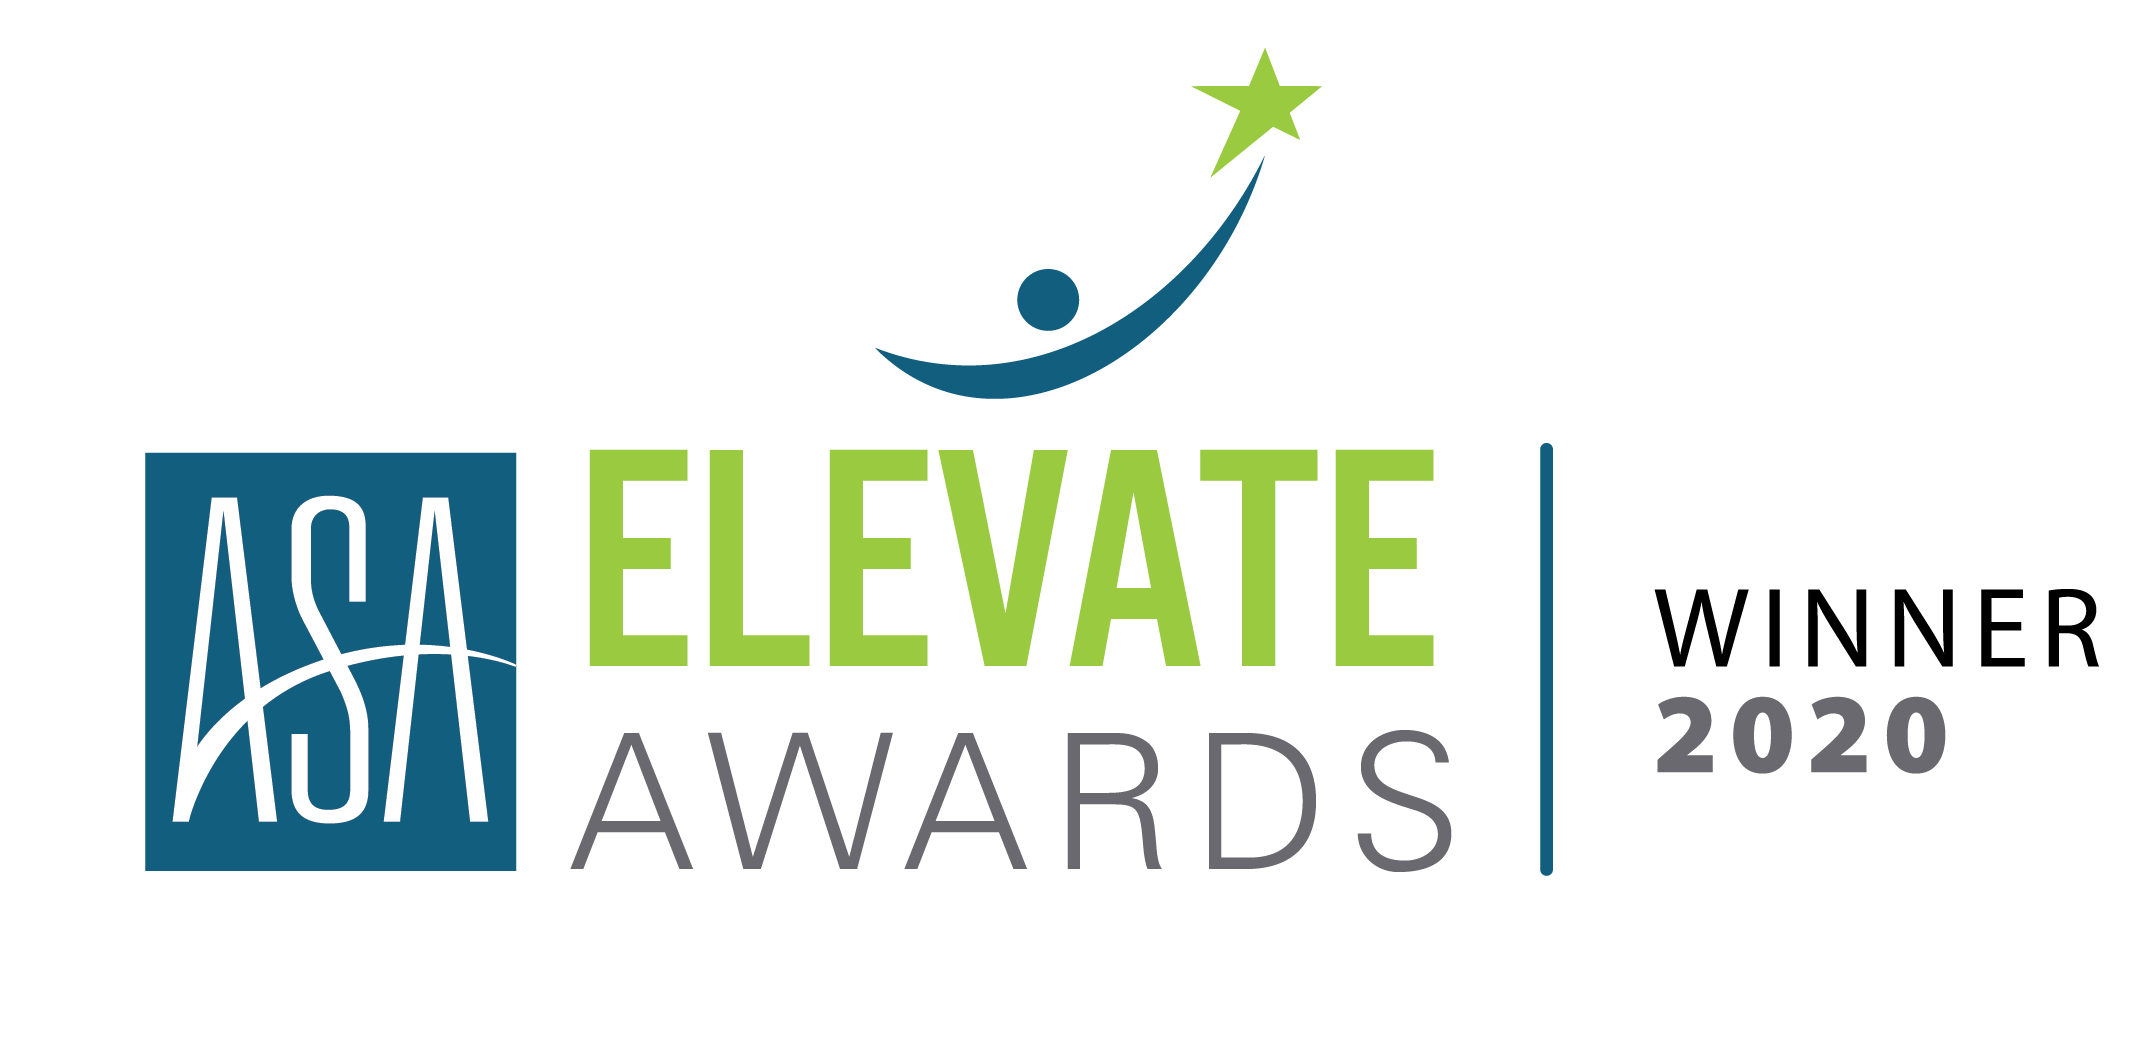 HWS Honored with American Staffing Association ELEVATE Award for Second